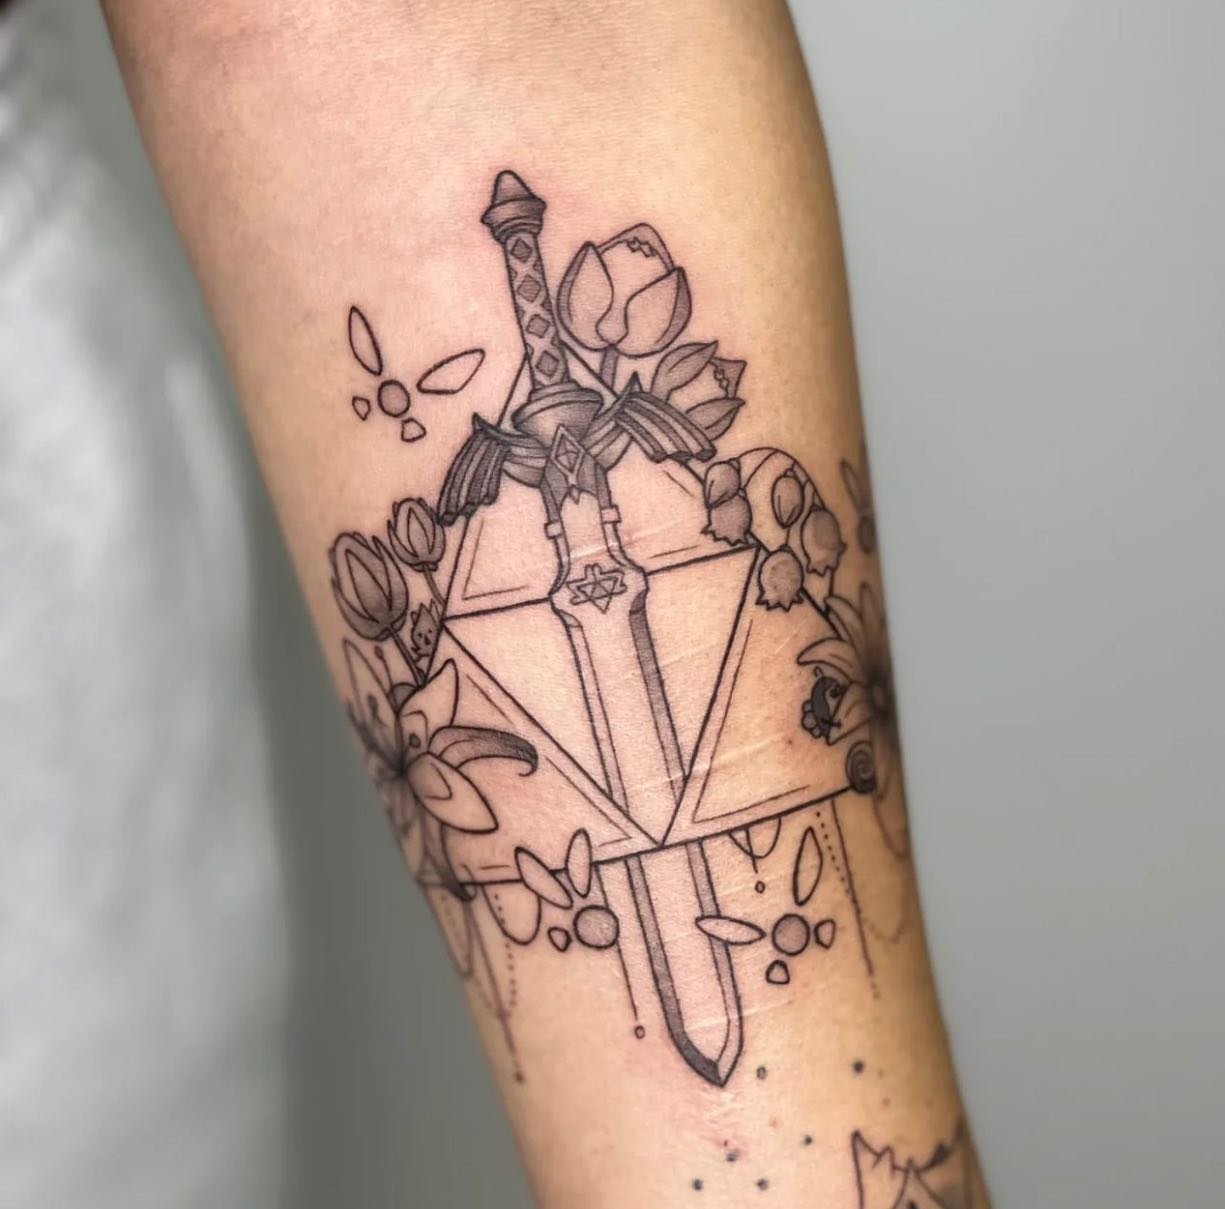 Custom master sword and triforce ⚔️ 
Apprentice work: @kaldrae.ink 
________________________________________________
[At Off the Ground Ink, we bring your tattoo ideas to life! 💭 For bookings and inquiries, reach out to us by email at offthegroundin